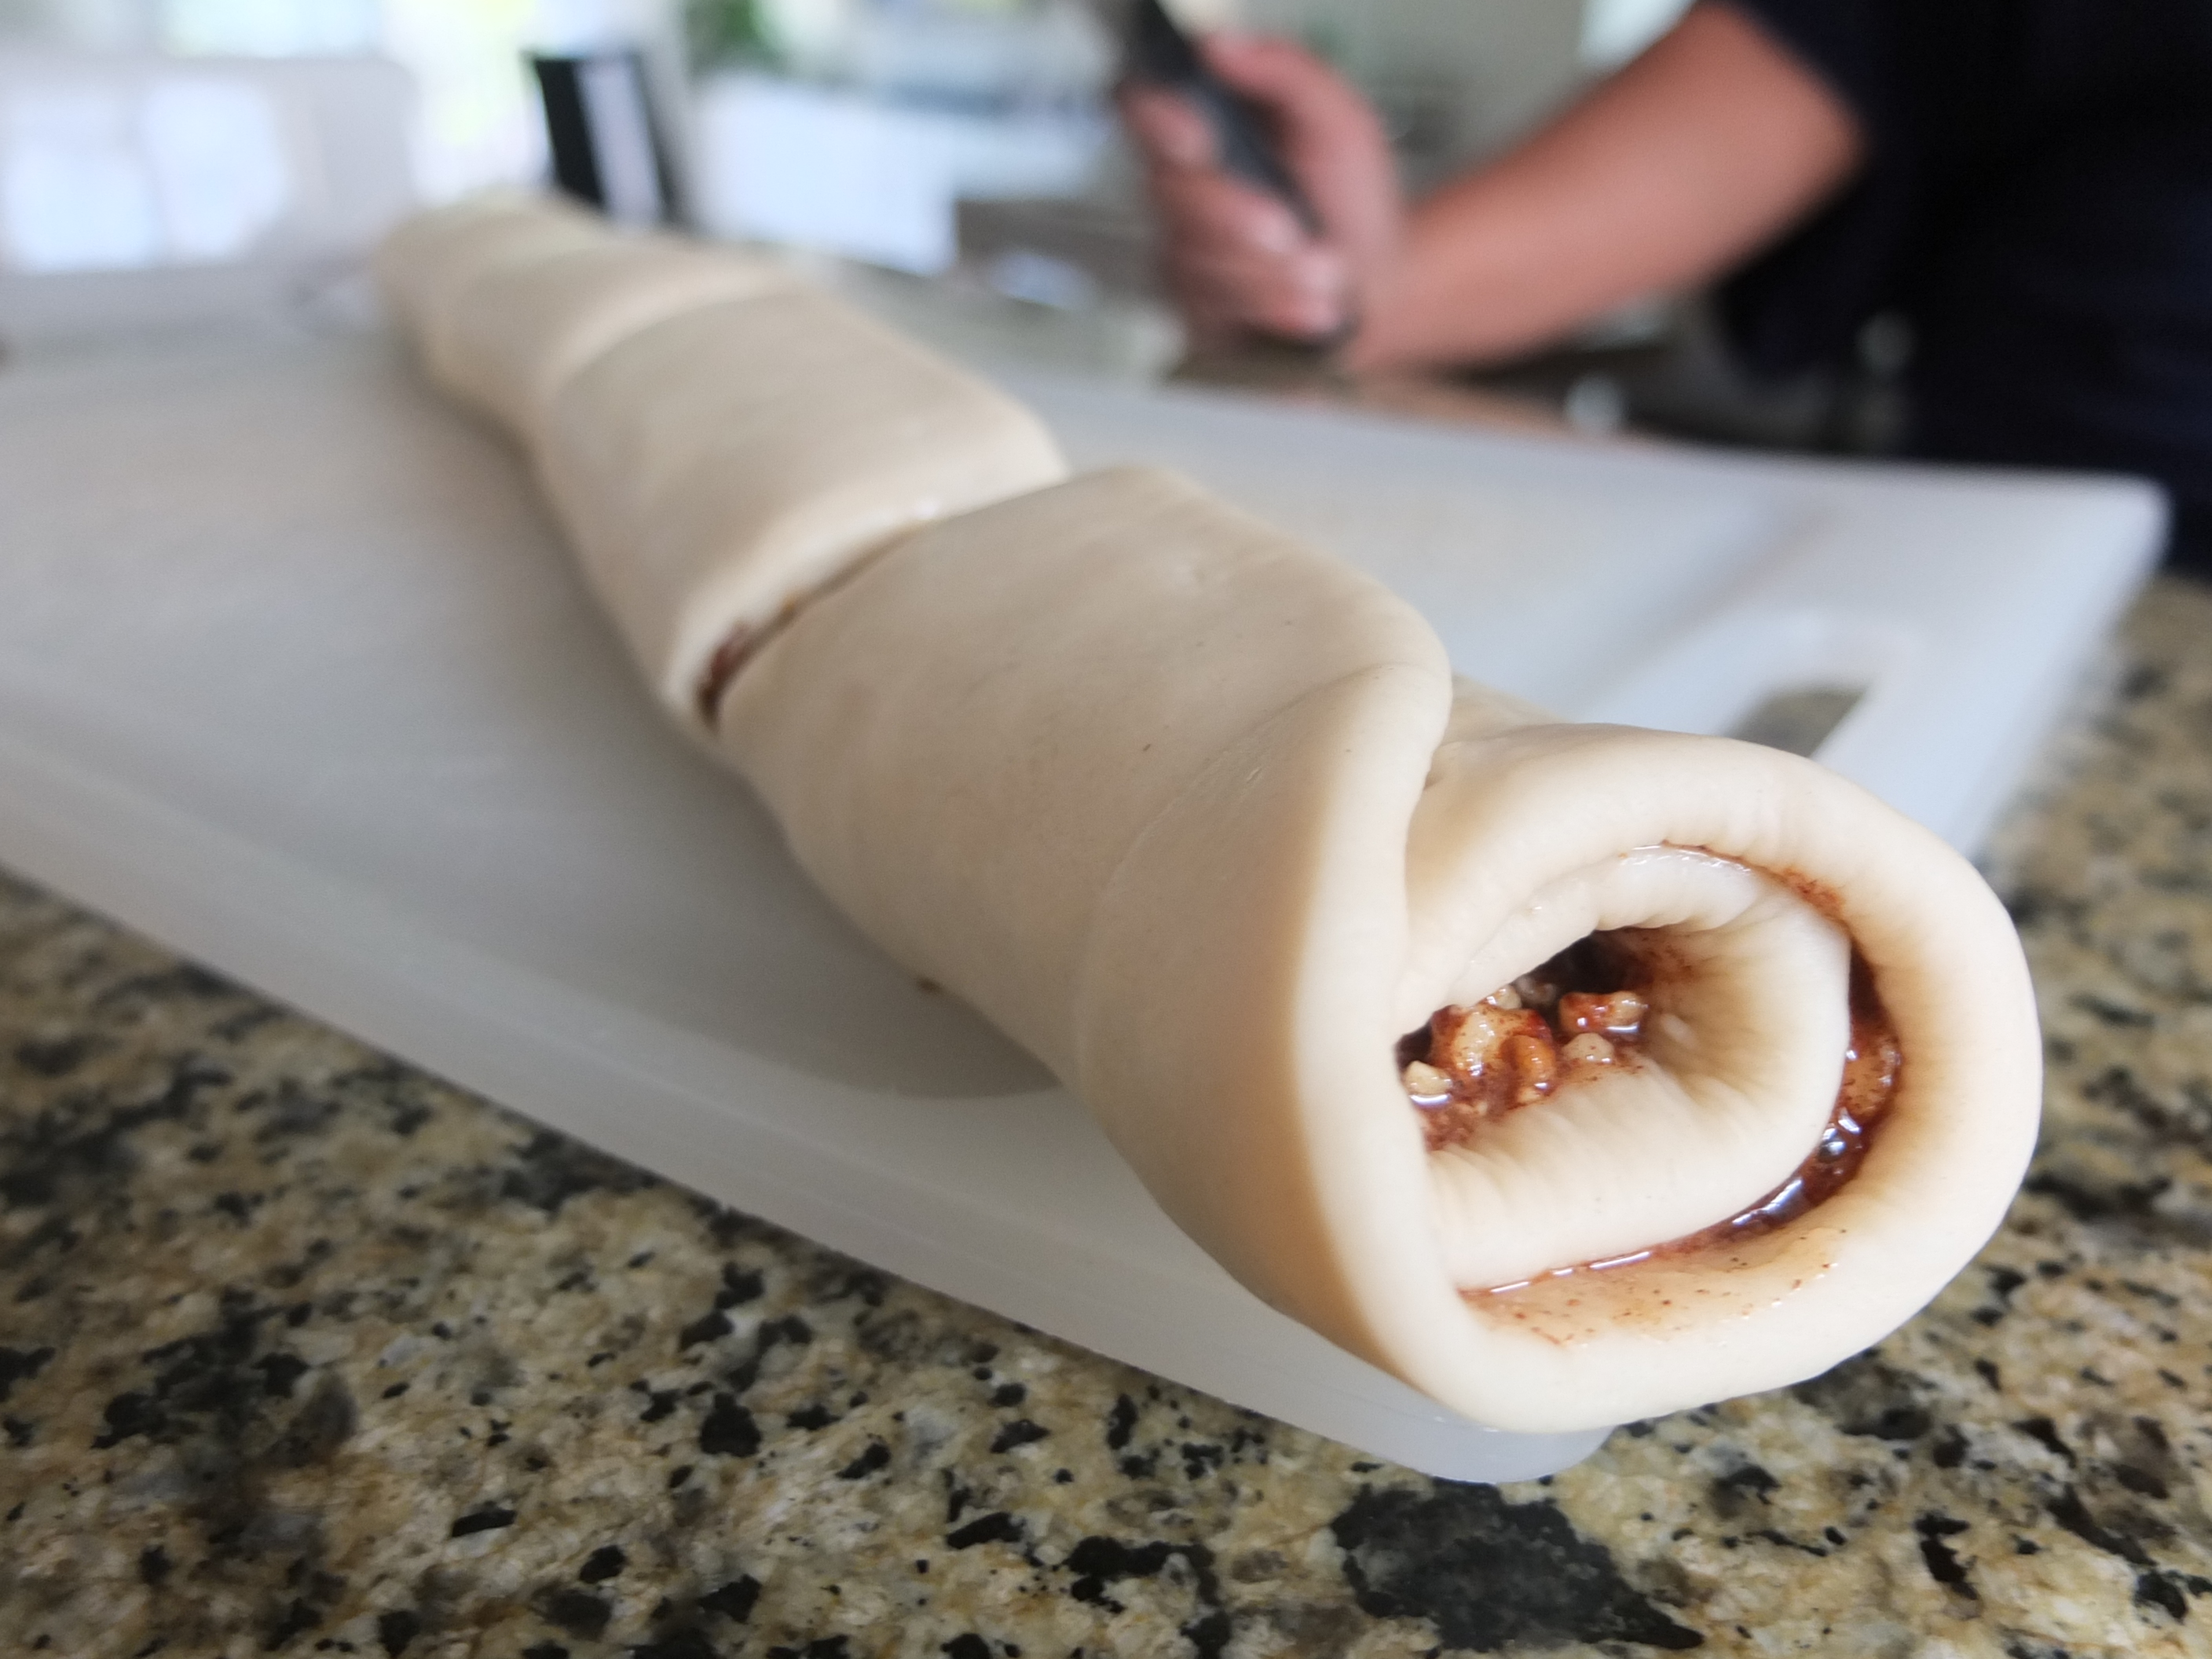 Rolled up dough with fillings for Sesame and Pecan Schnecken Rolls with Orange Glaze